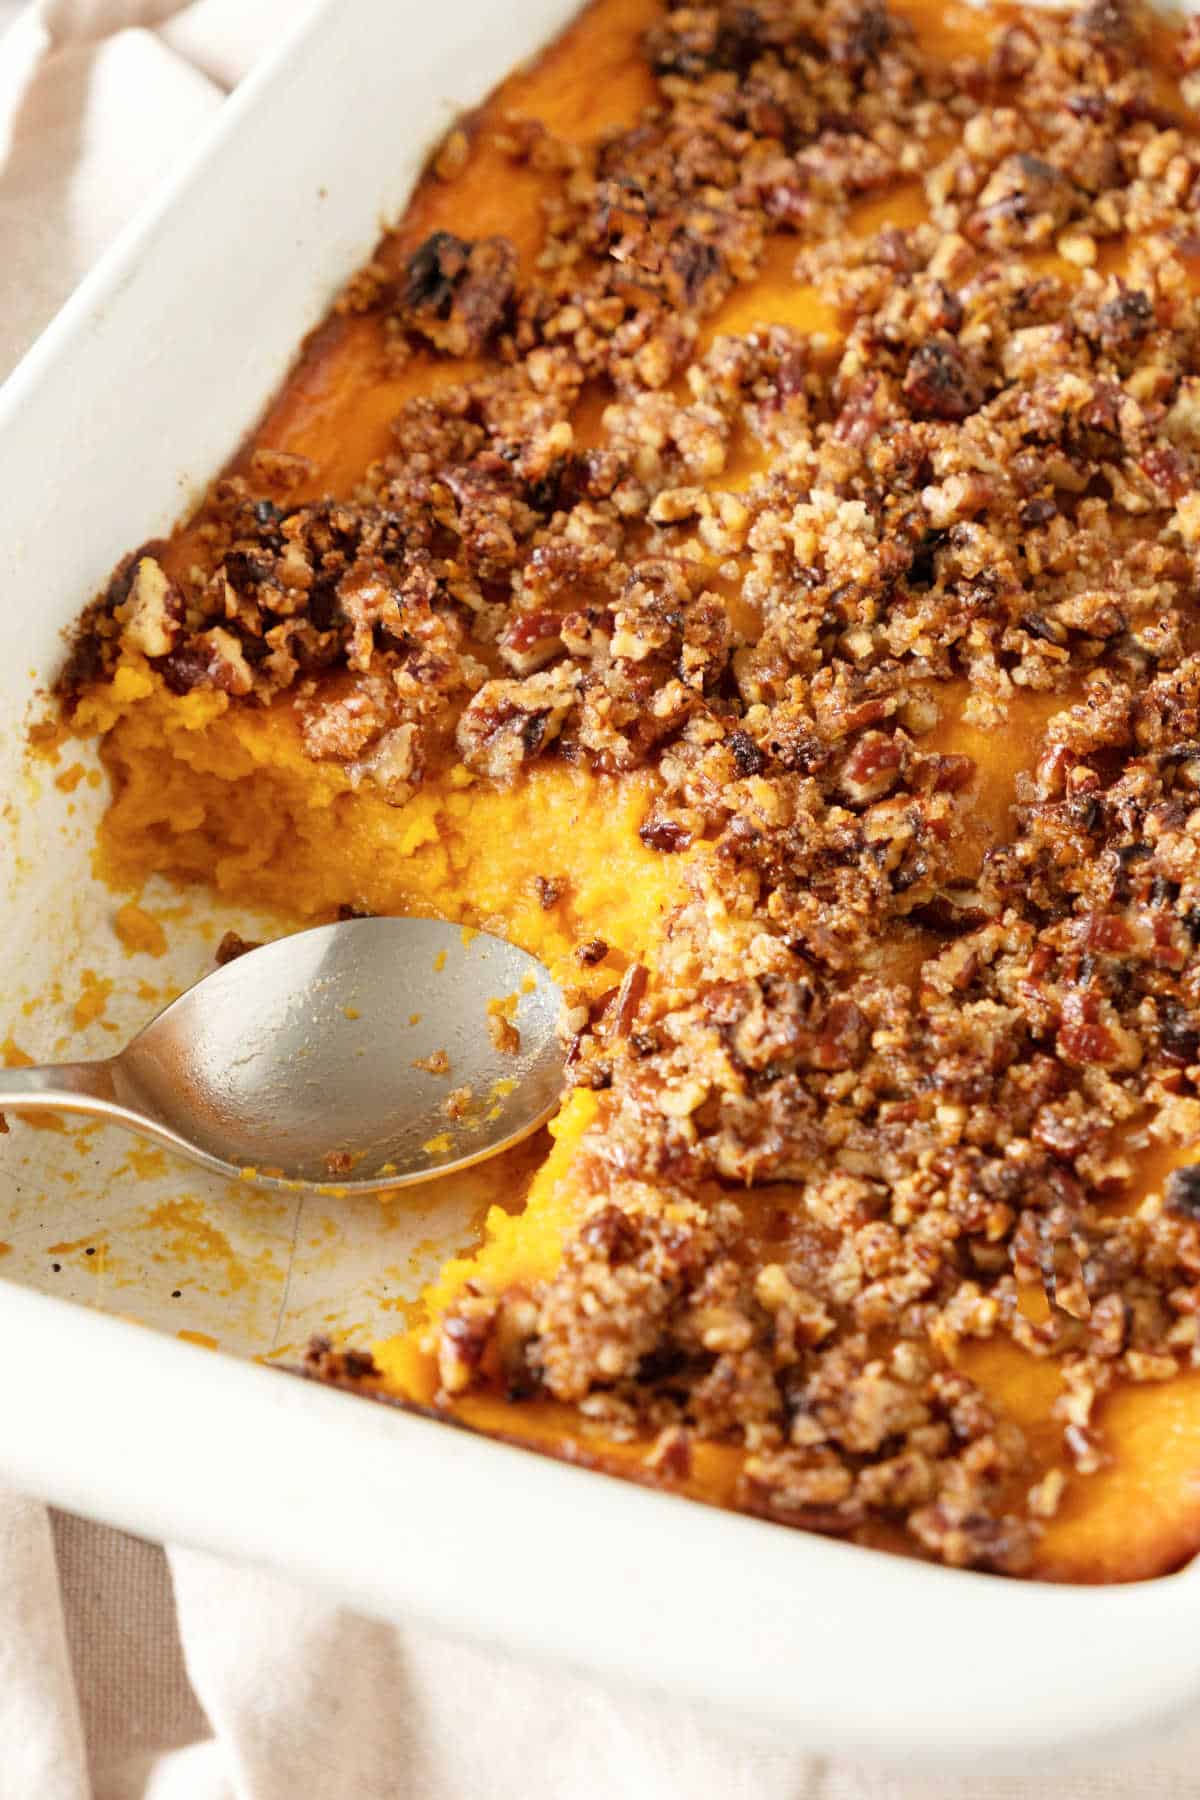 Serving missing in a pecan sweet potato casserole. Silver spoon, white rectangular dish. 